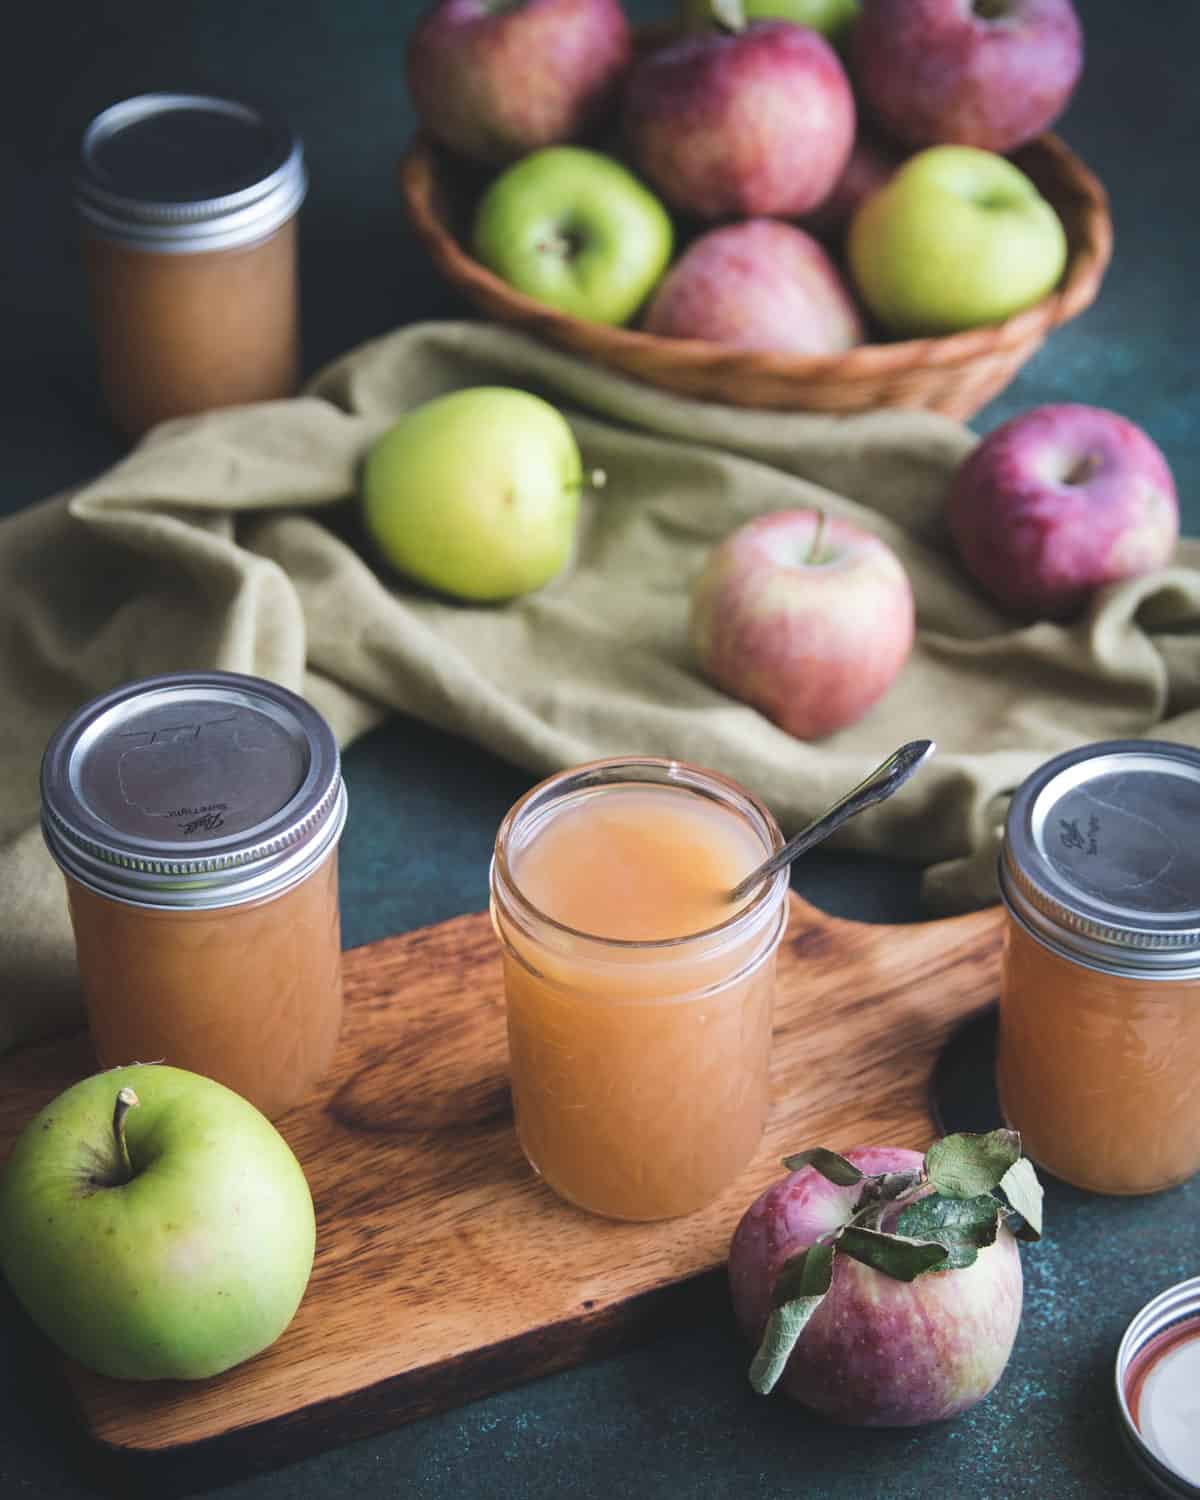 How to Make Apple Jelly With Just Two Ingredients